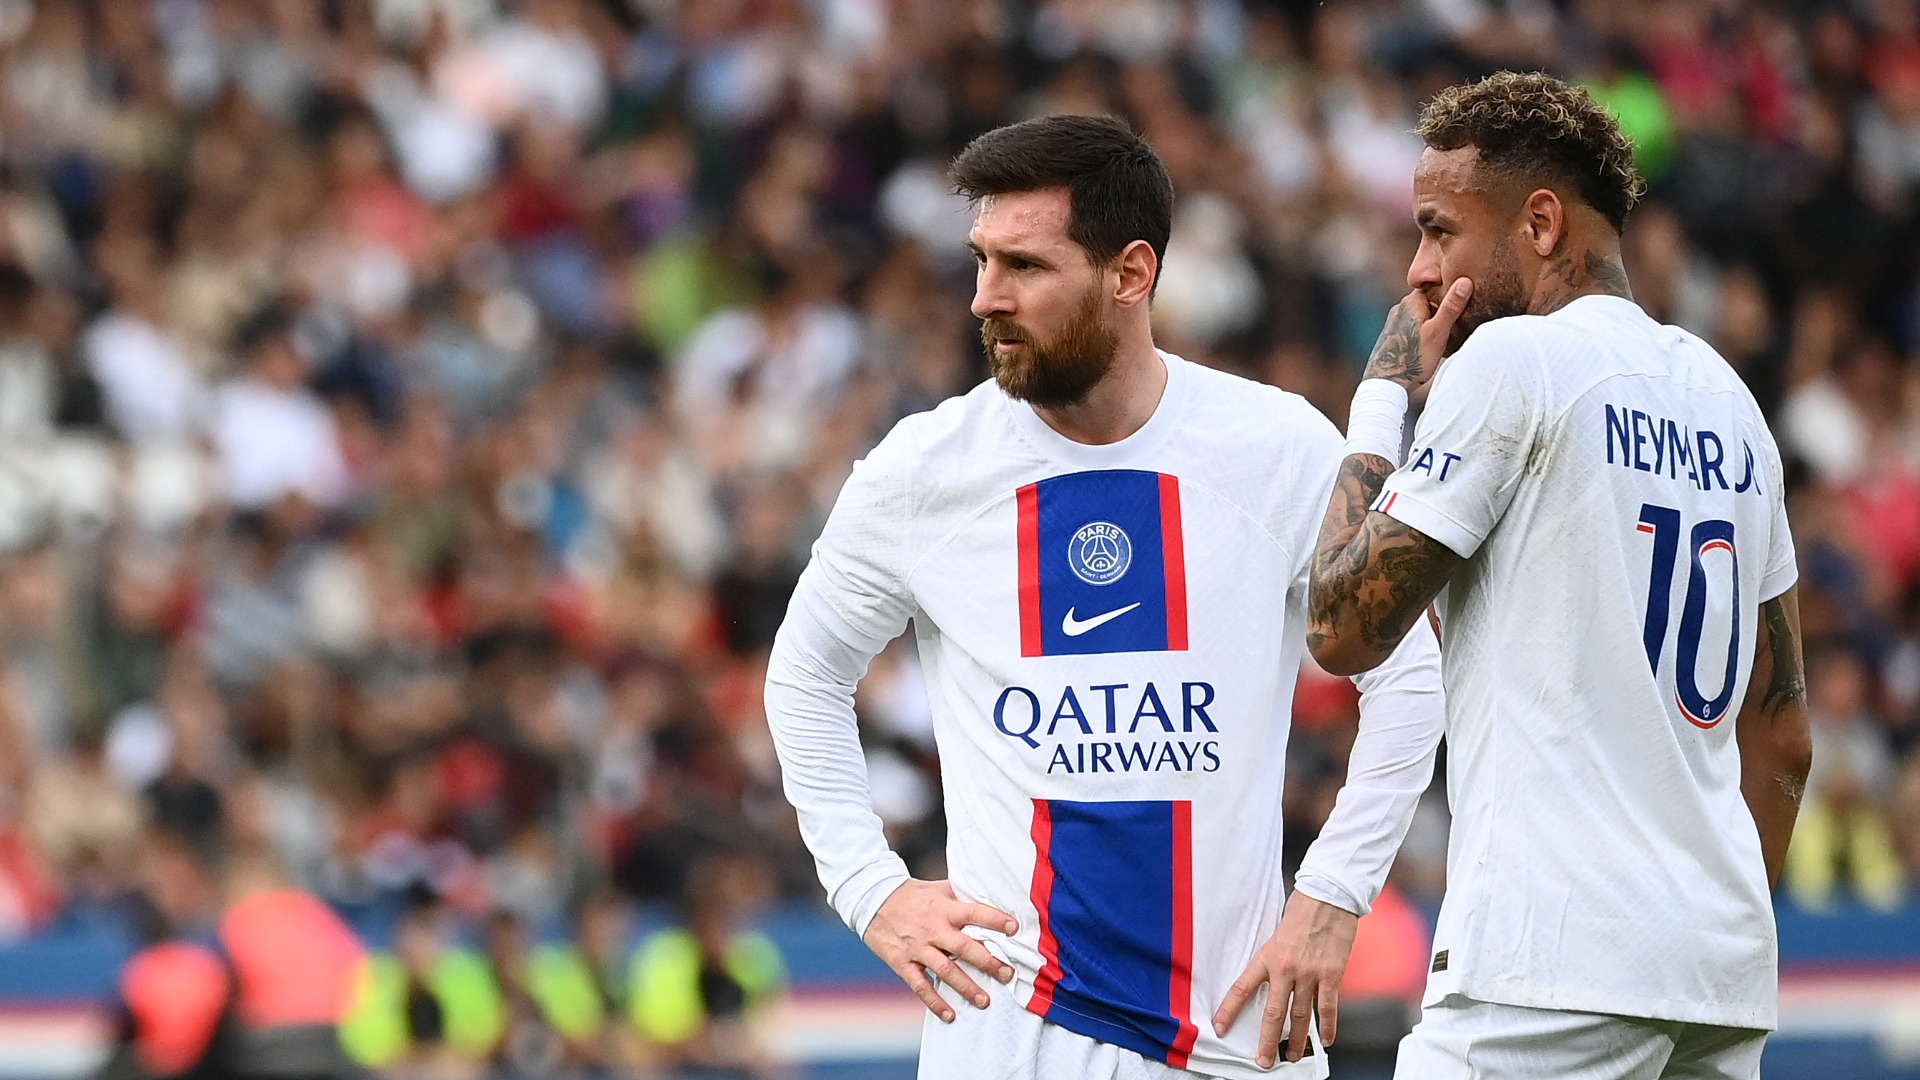 Photo: Messi Sends Special Farewell Message to Neymar After Final Match of the Season – PSG Talk